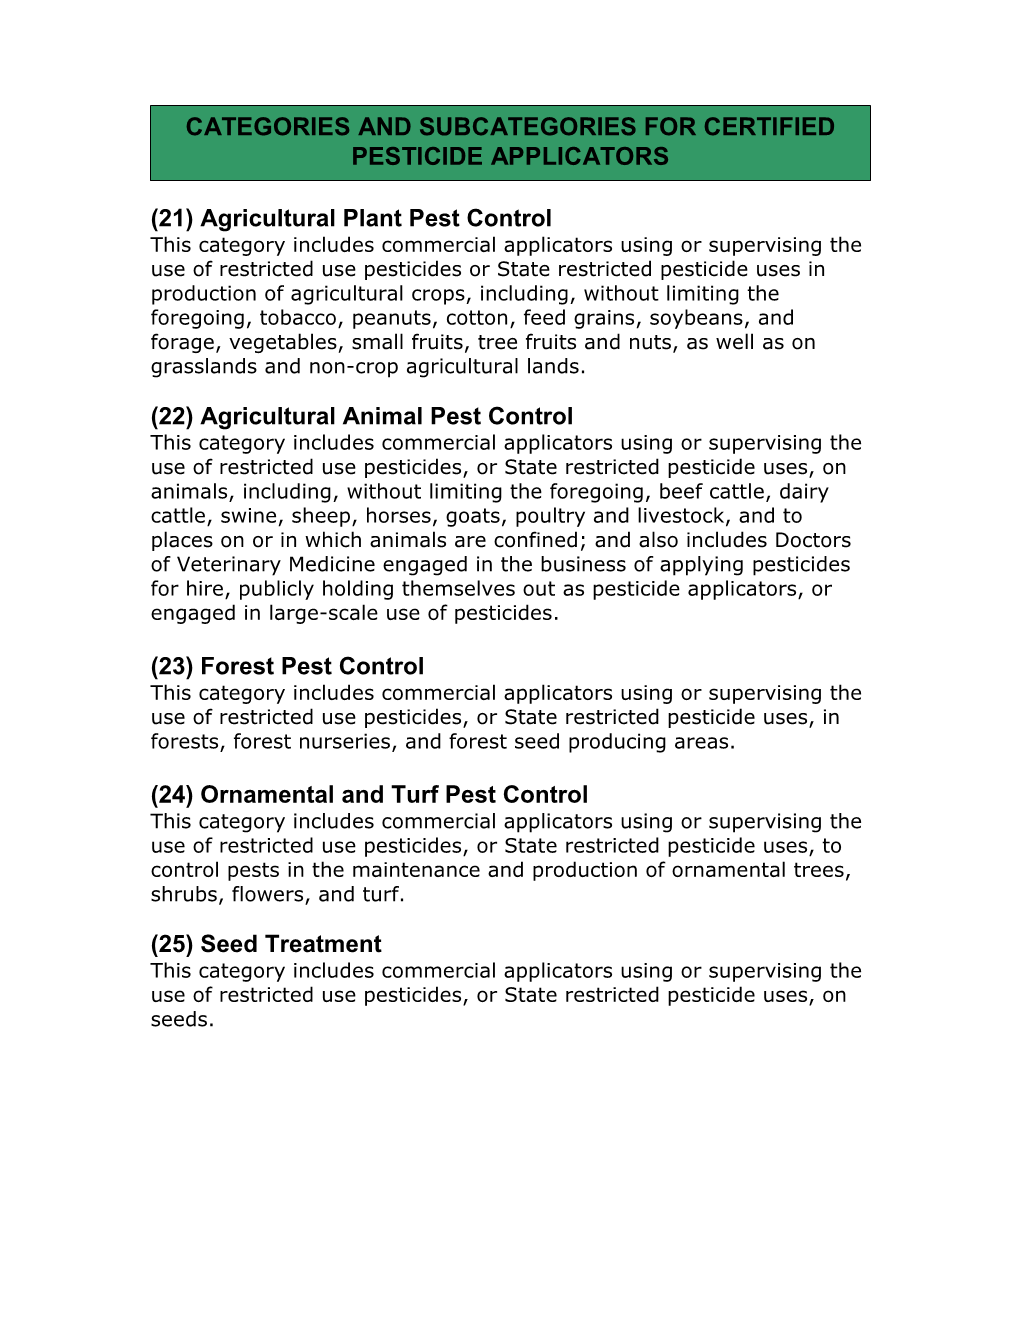 Categories and Subcategories of Pesticide Applicator Licenses